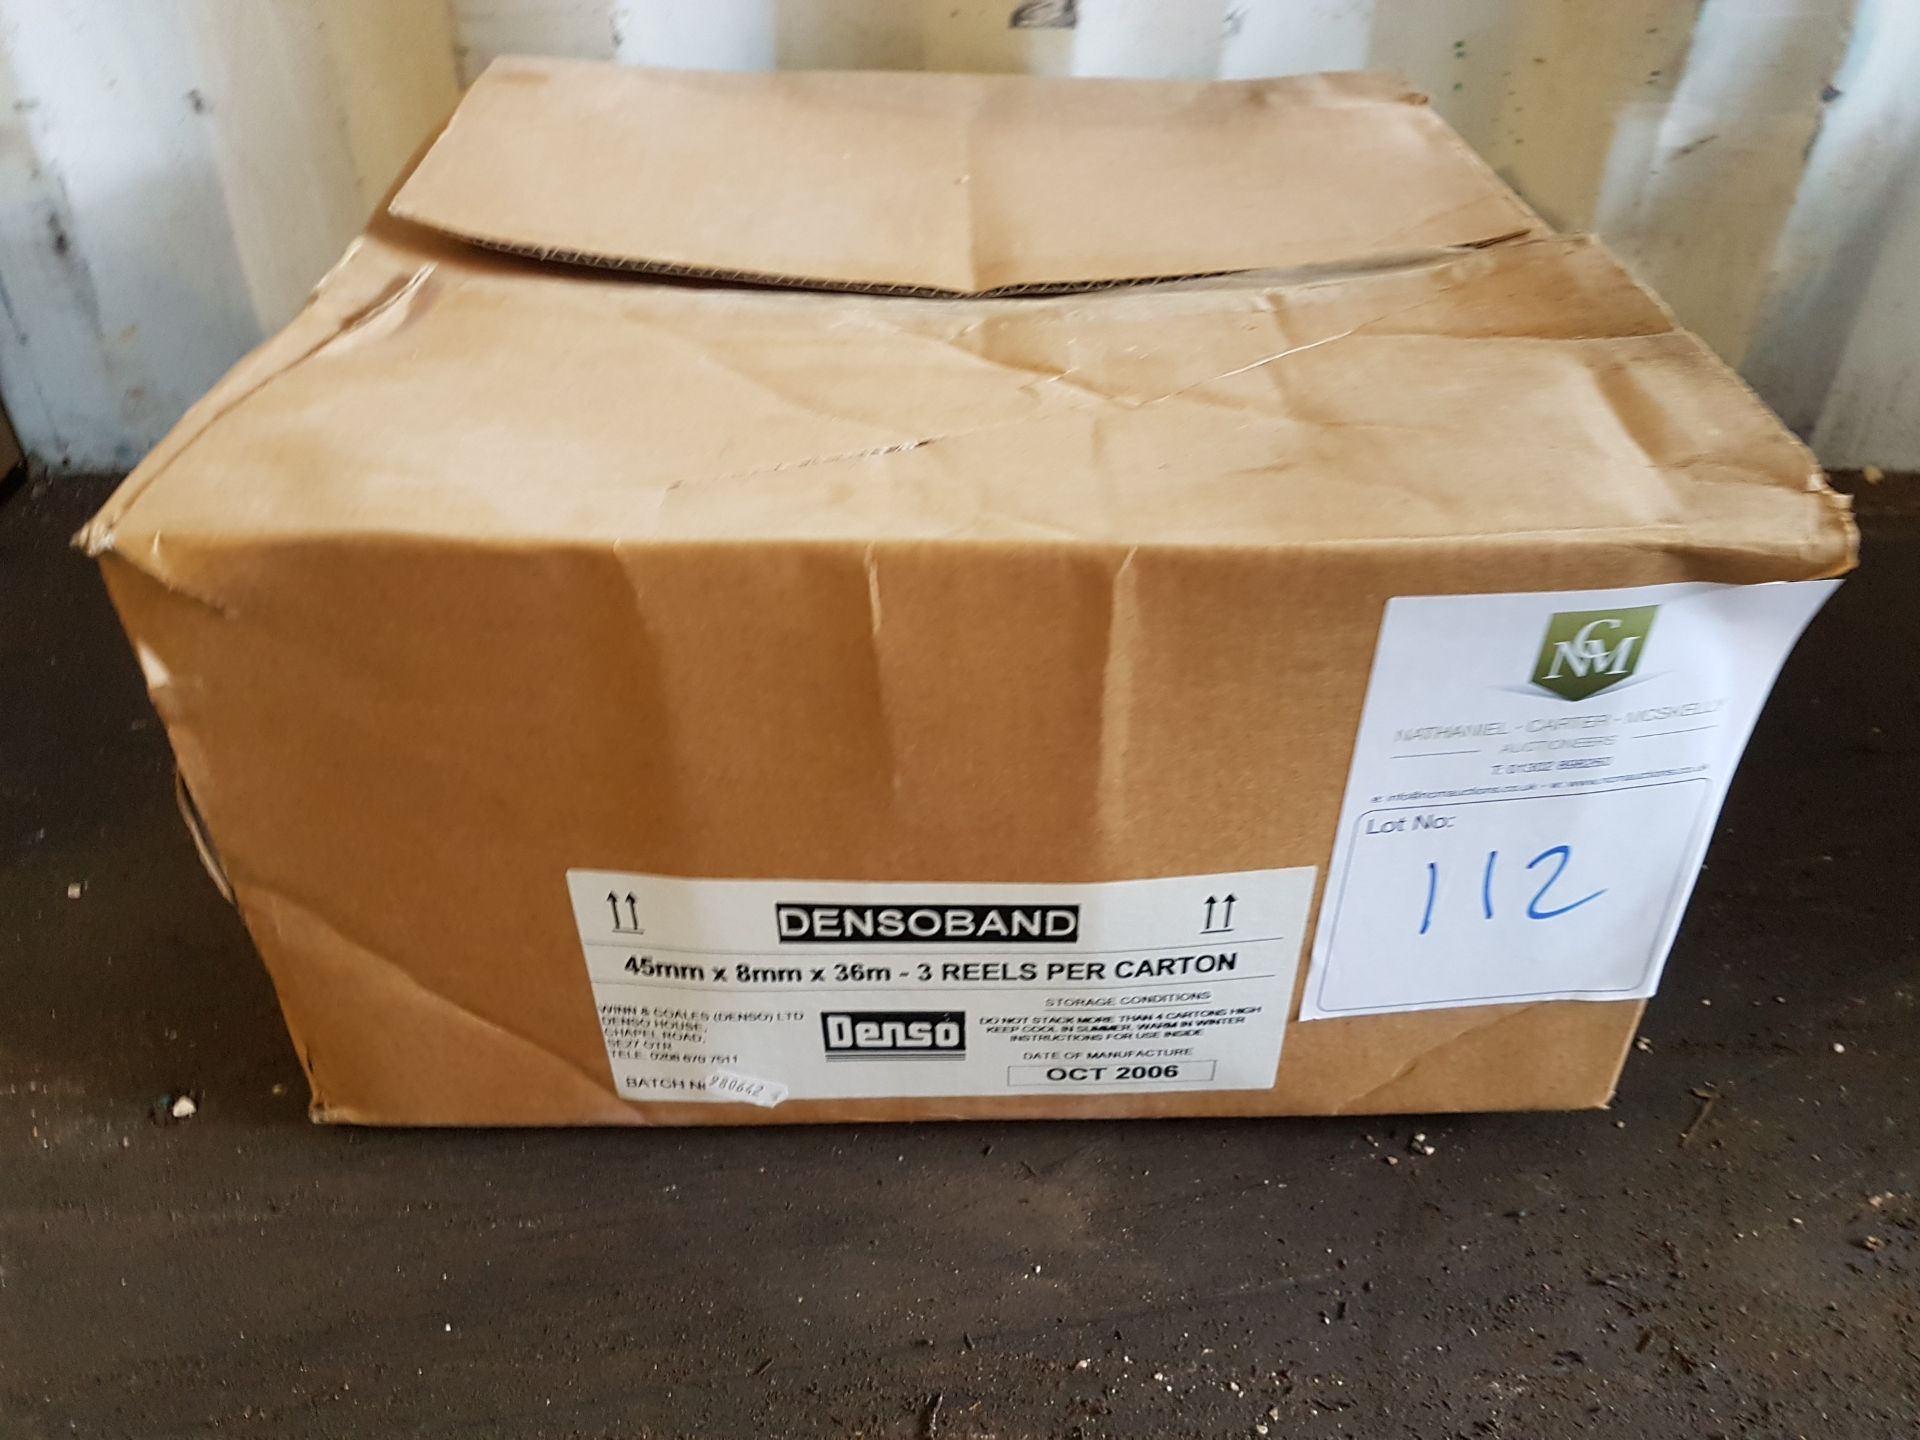 Densoband in box NO RESERVE (Amount unknown)